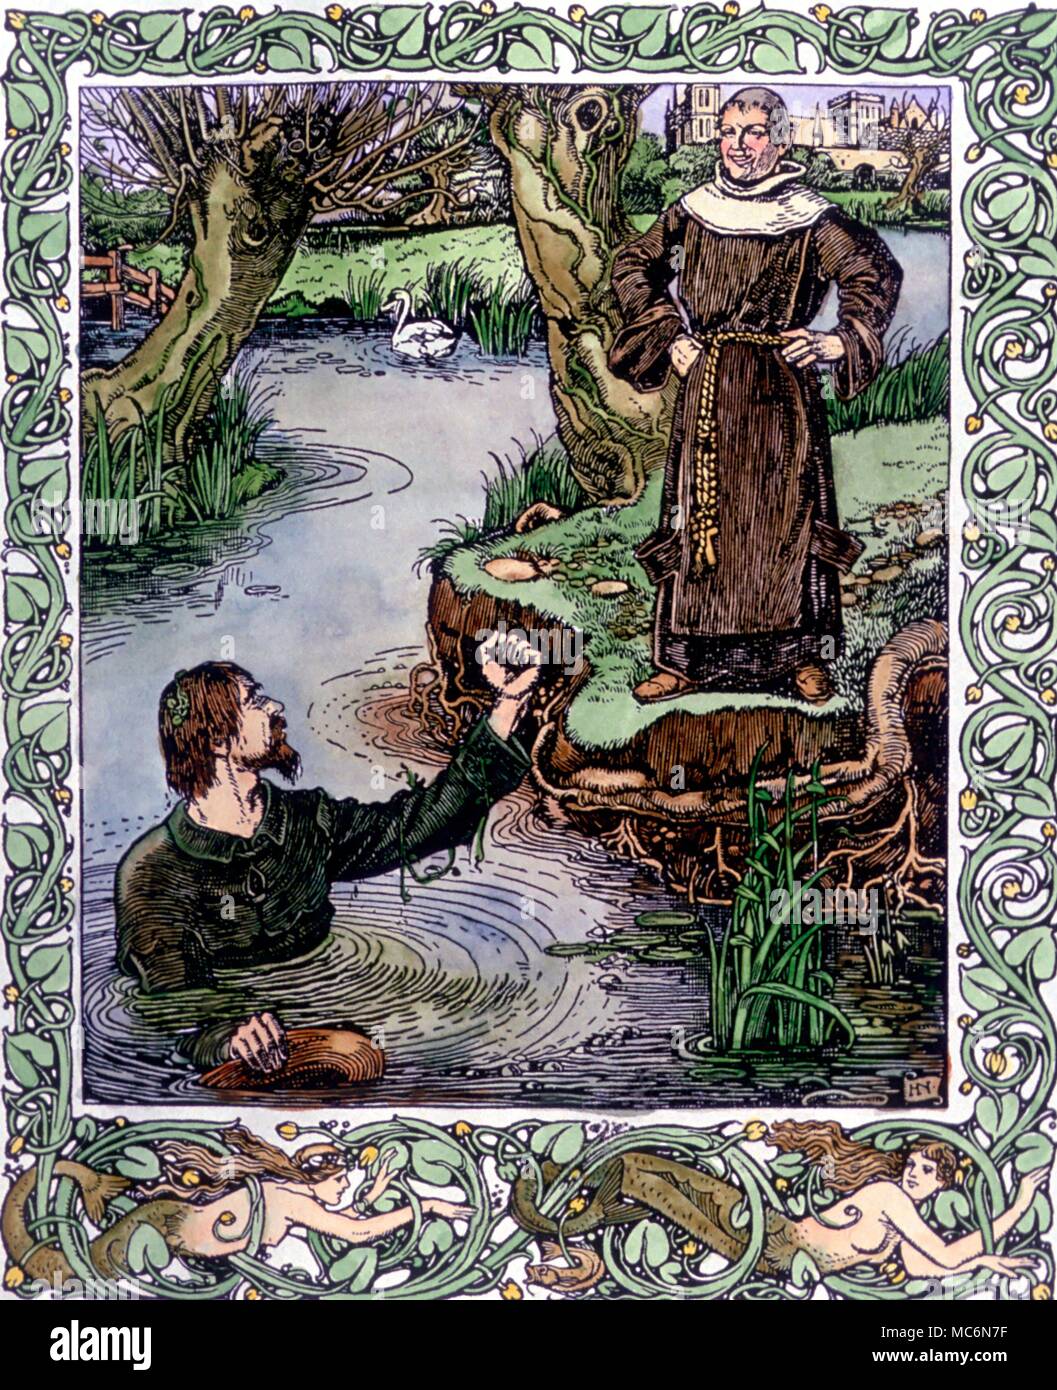 Robin Hood Robin Hood meets his kinsman, Gamwel. Illustration from The Noble and Gallant Achievements of ... Robin Hood print of circa 1895 by Harold Nelson Stock Photo